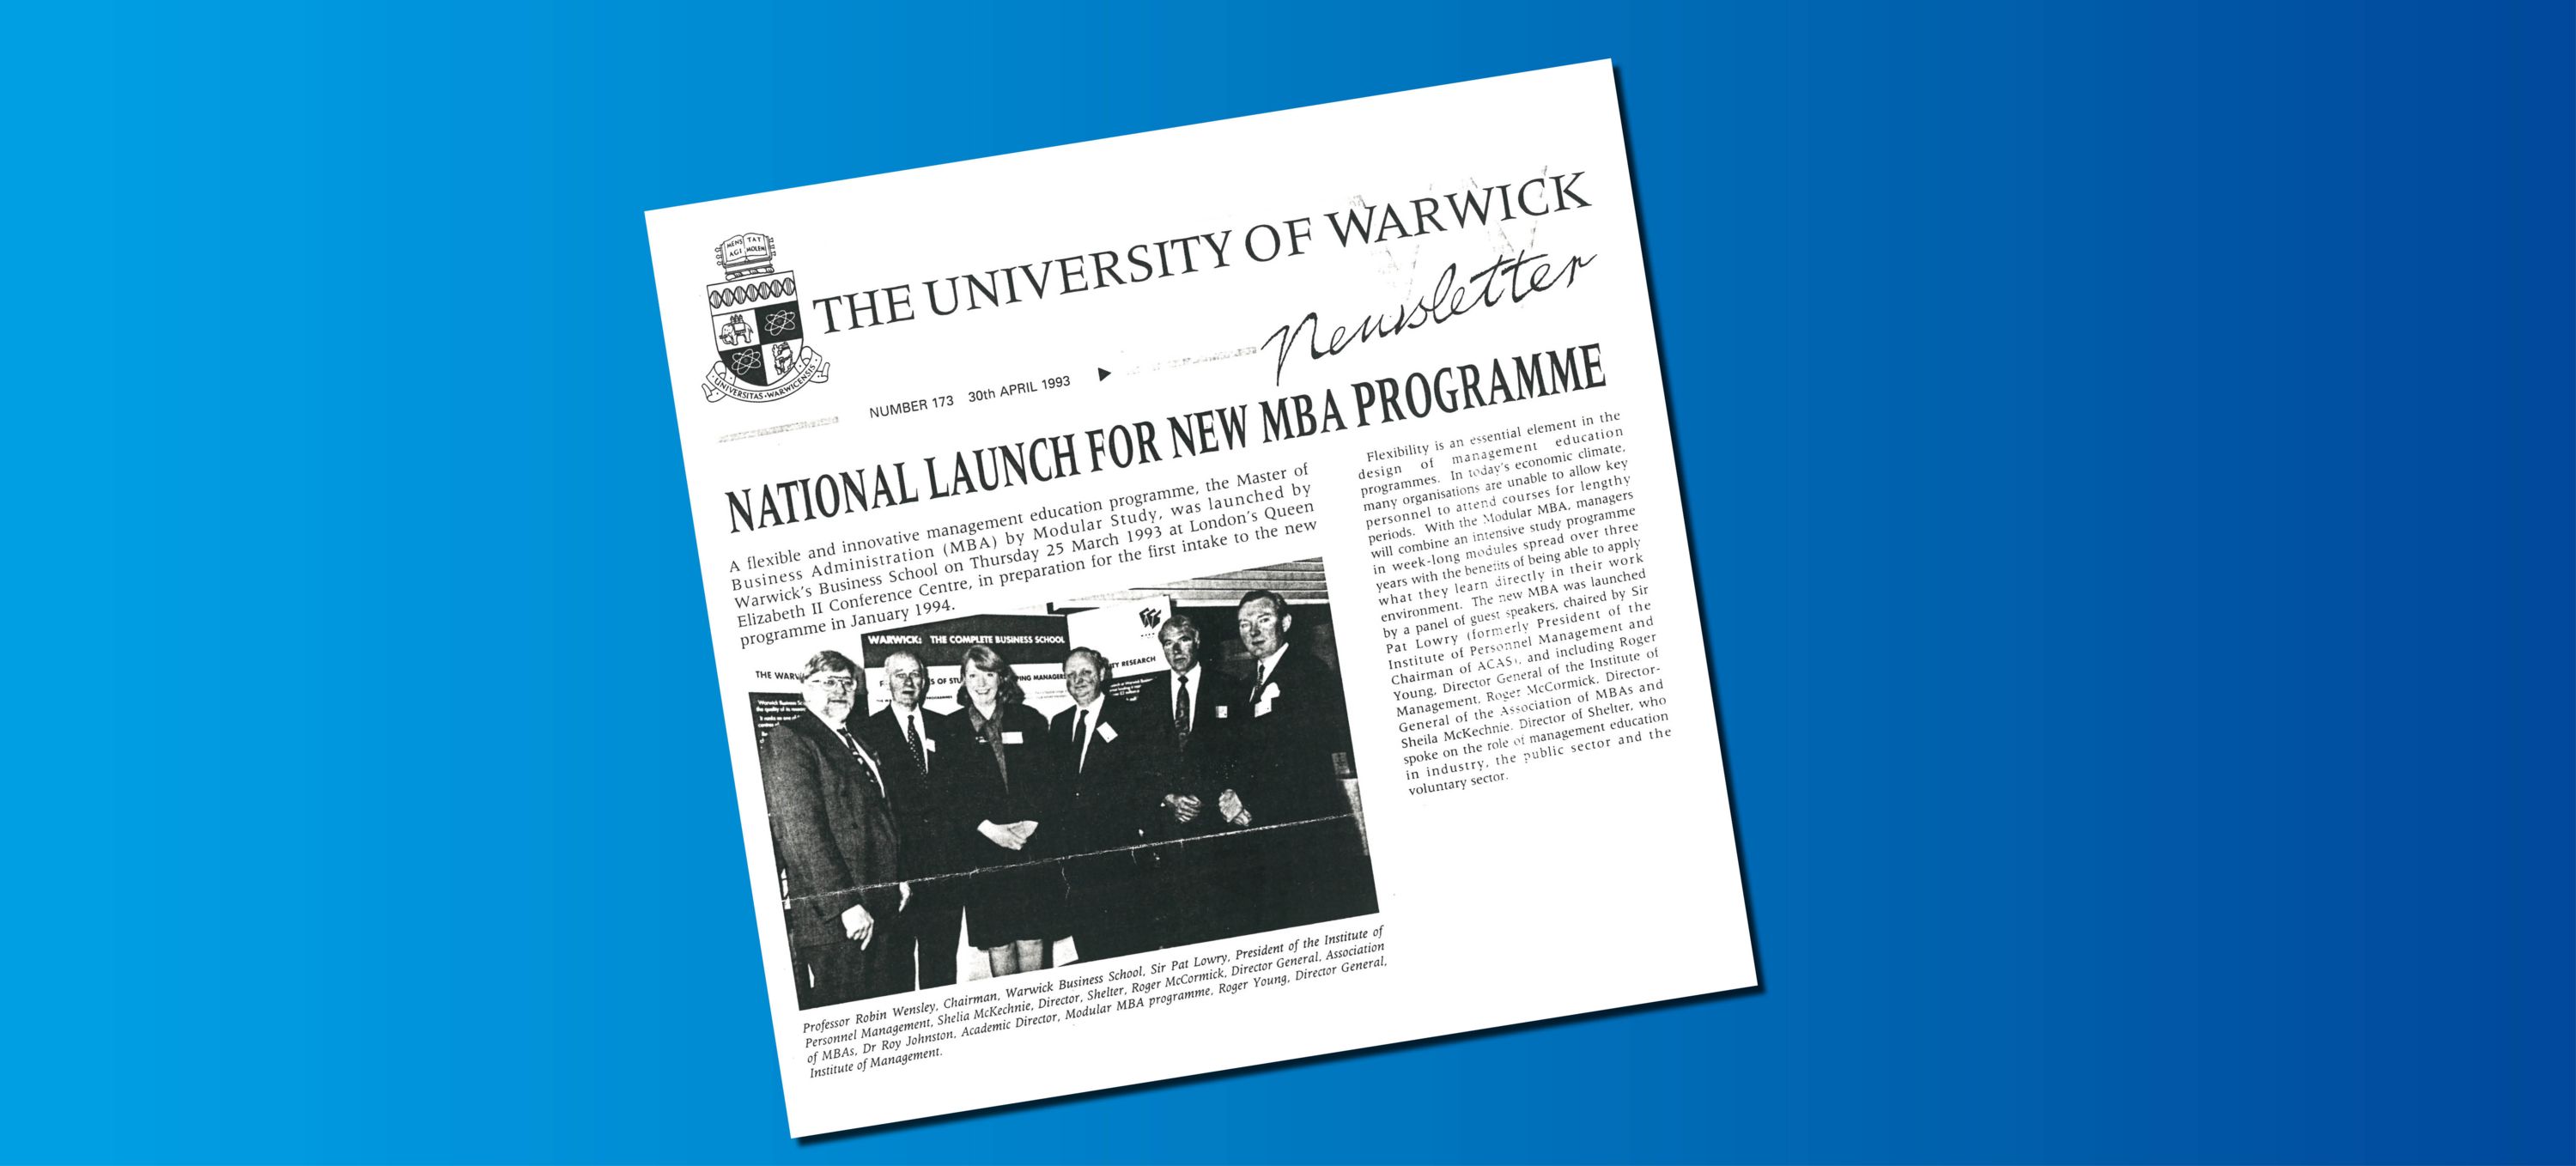 1993: Warwick's MBA by modular study was launched at London's Queen Elizabeth II Conference Centre